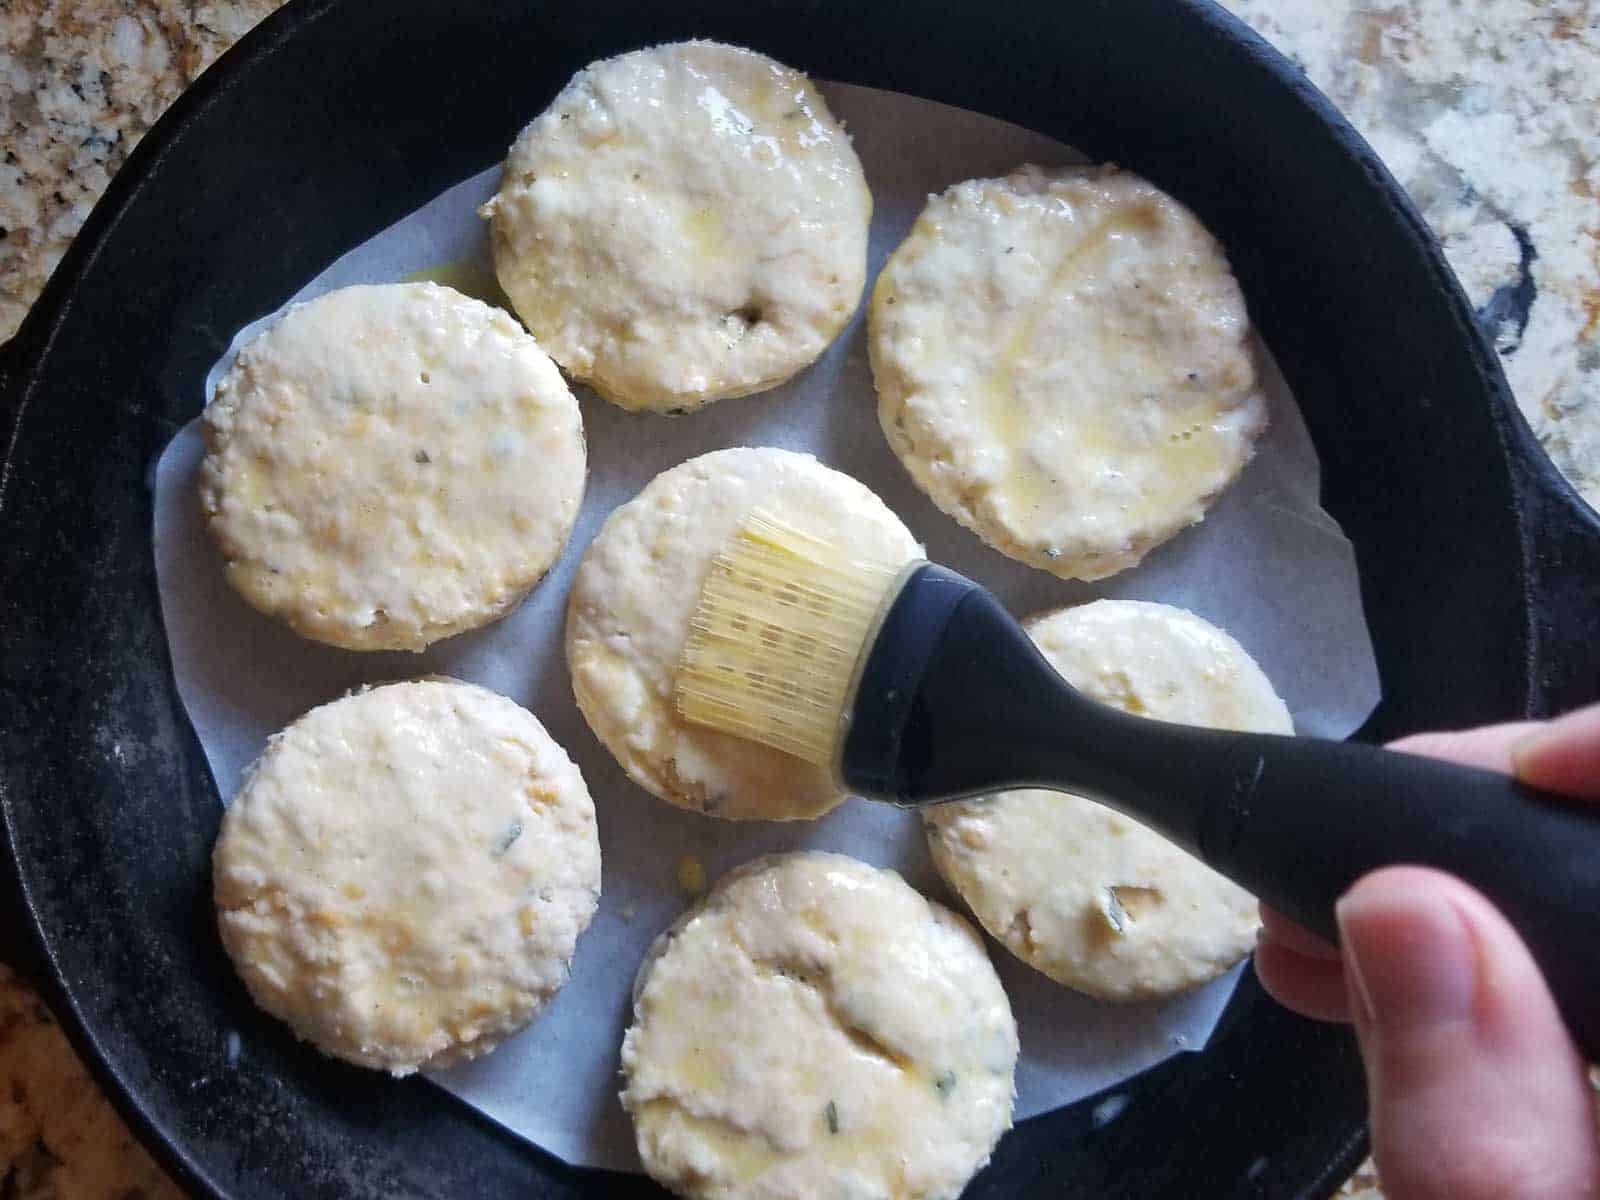 Cut biscuits getting and egg wash and placed in a cast iron skillet ready for baking.